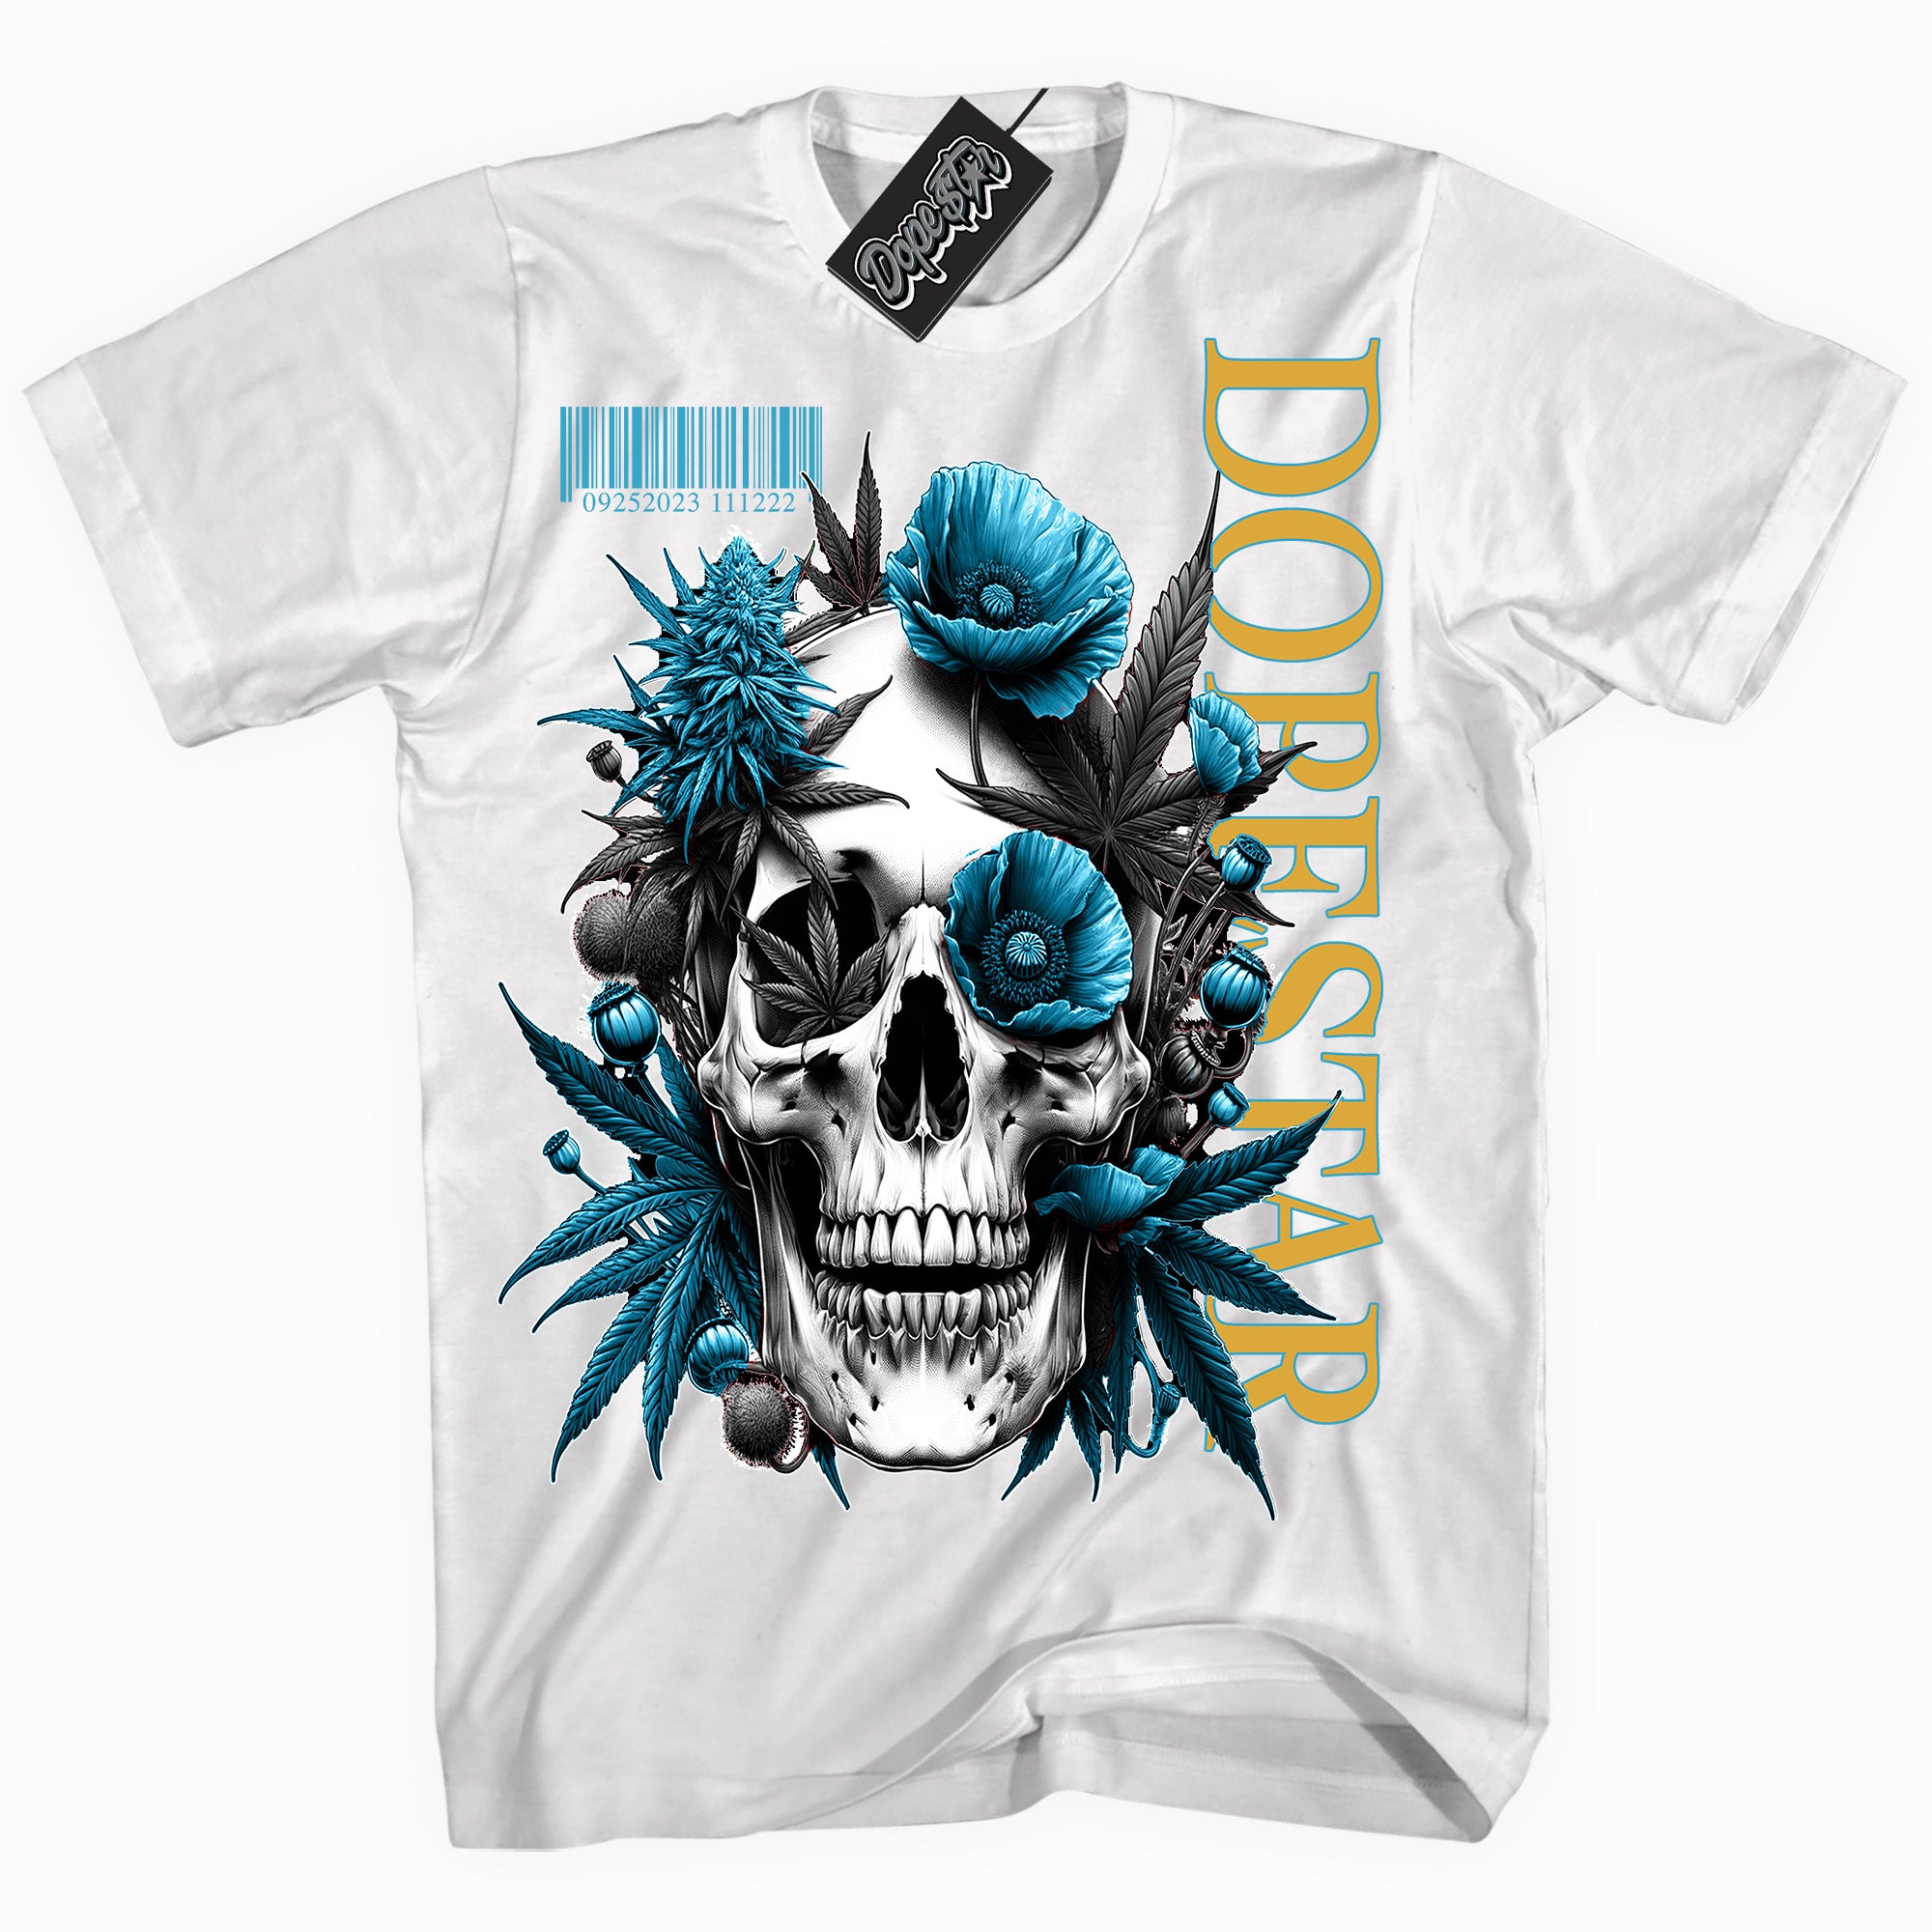 Cool White graphic tee with “ Skull Poppies ” print, that perfectly matches AQUA 5s sneakers 